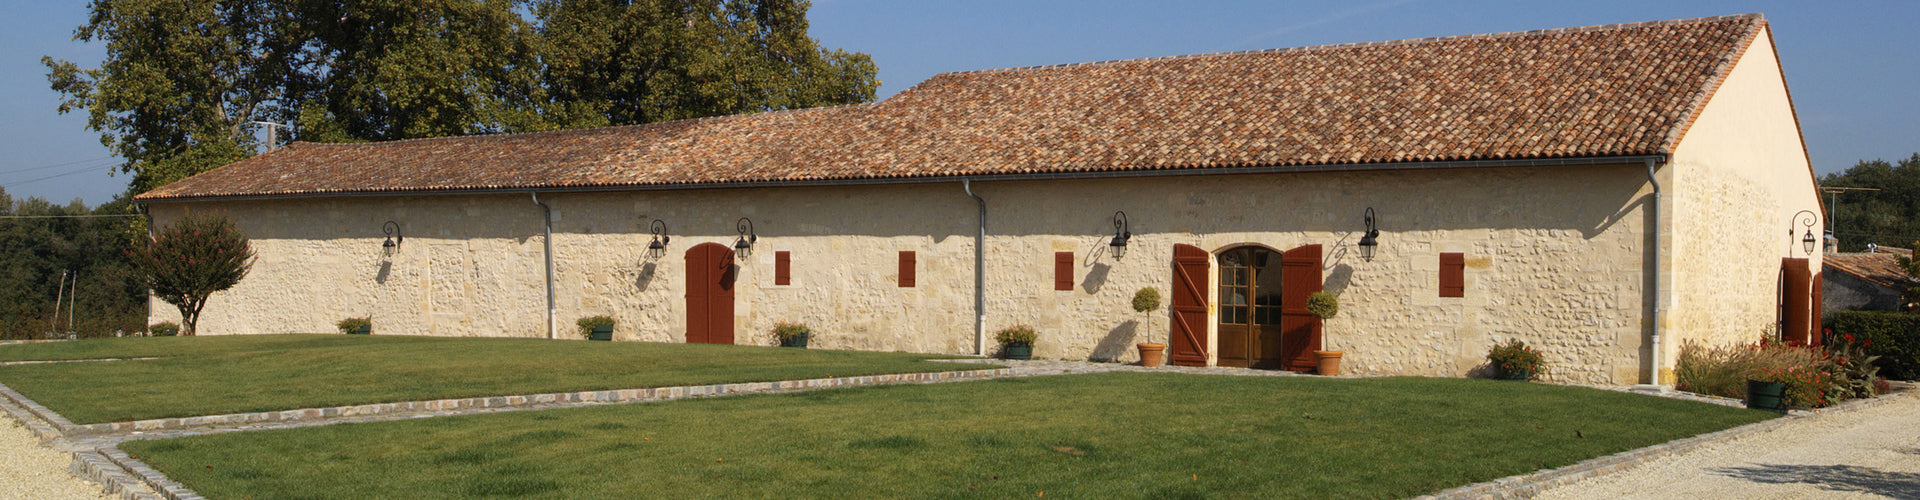 Château Angludet Winery Building in Margaux